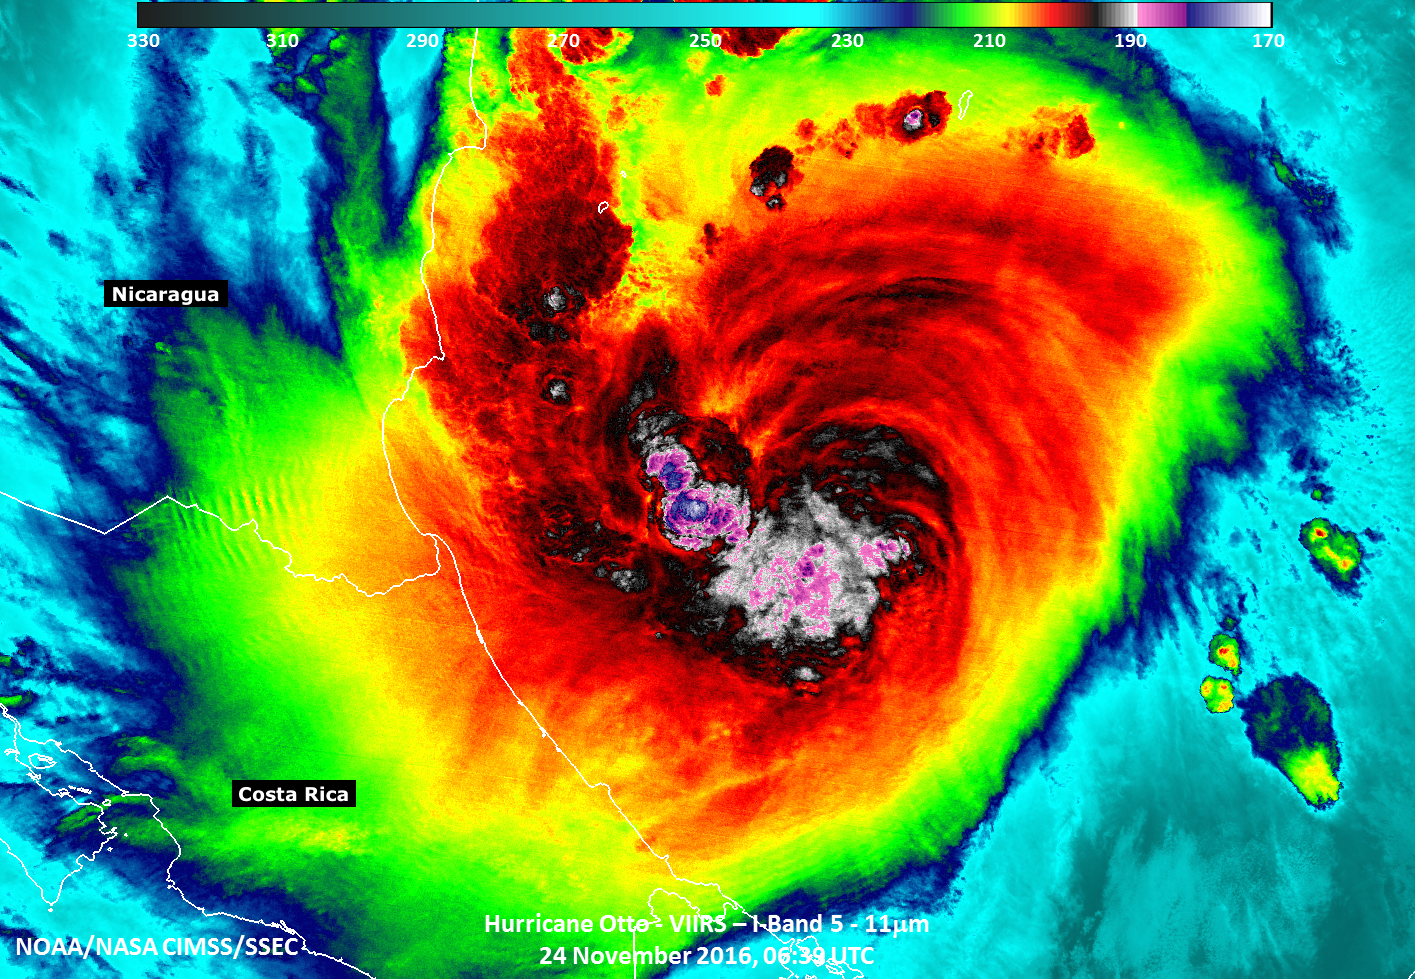 Suomi NPP VIIRS Infrared Window (11.45 µm) image [click to enlarge]